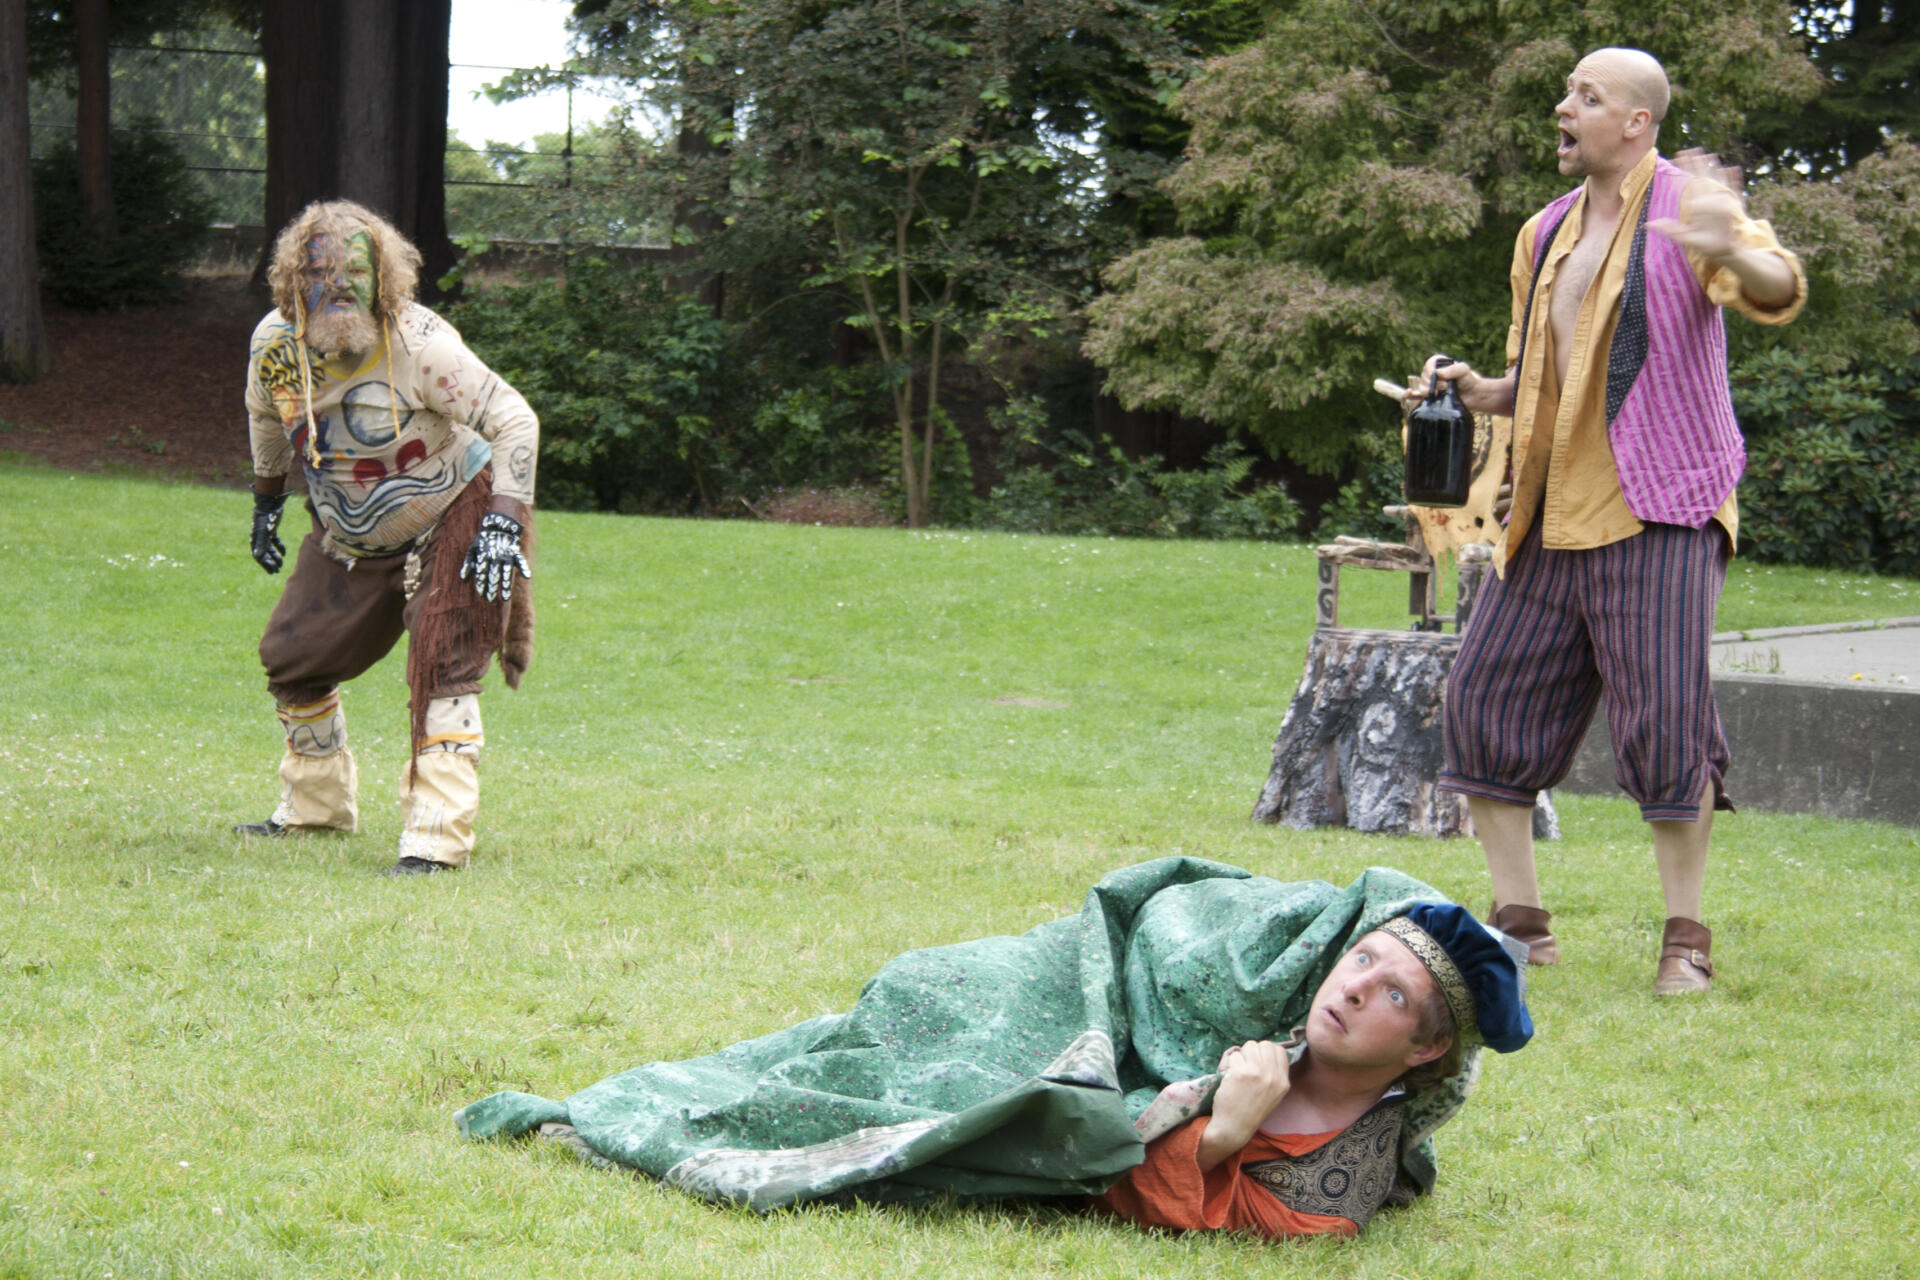 Don MacEllis, Anthony Duckett, and Daniel Wood in The Tempest - 2011